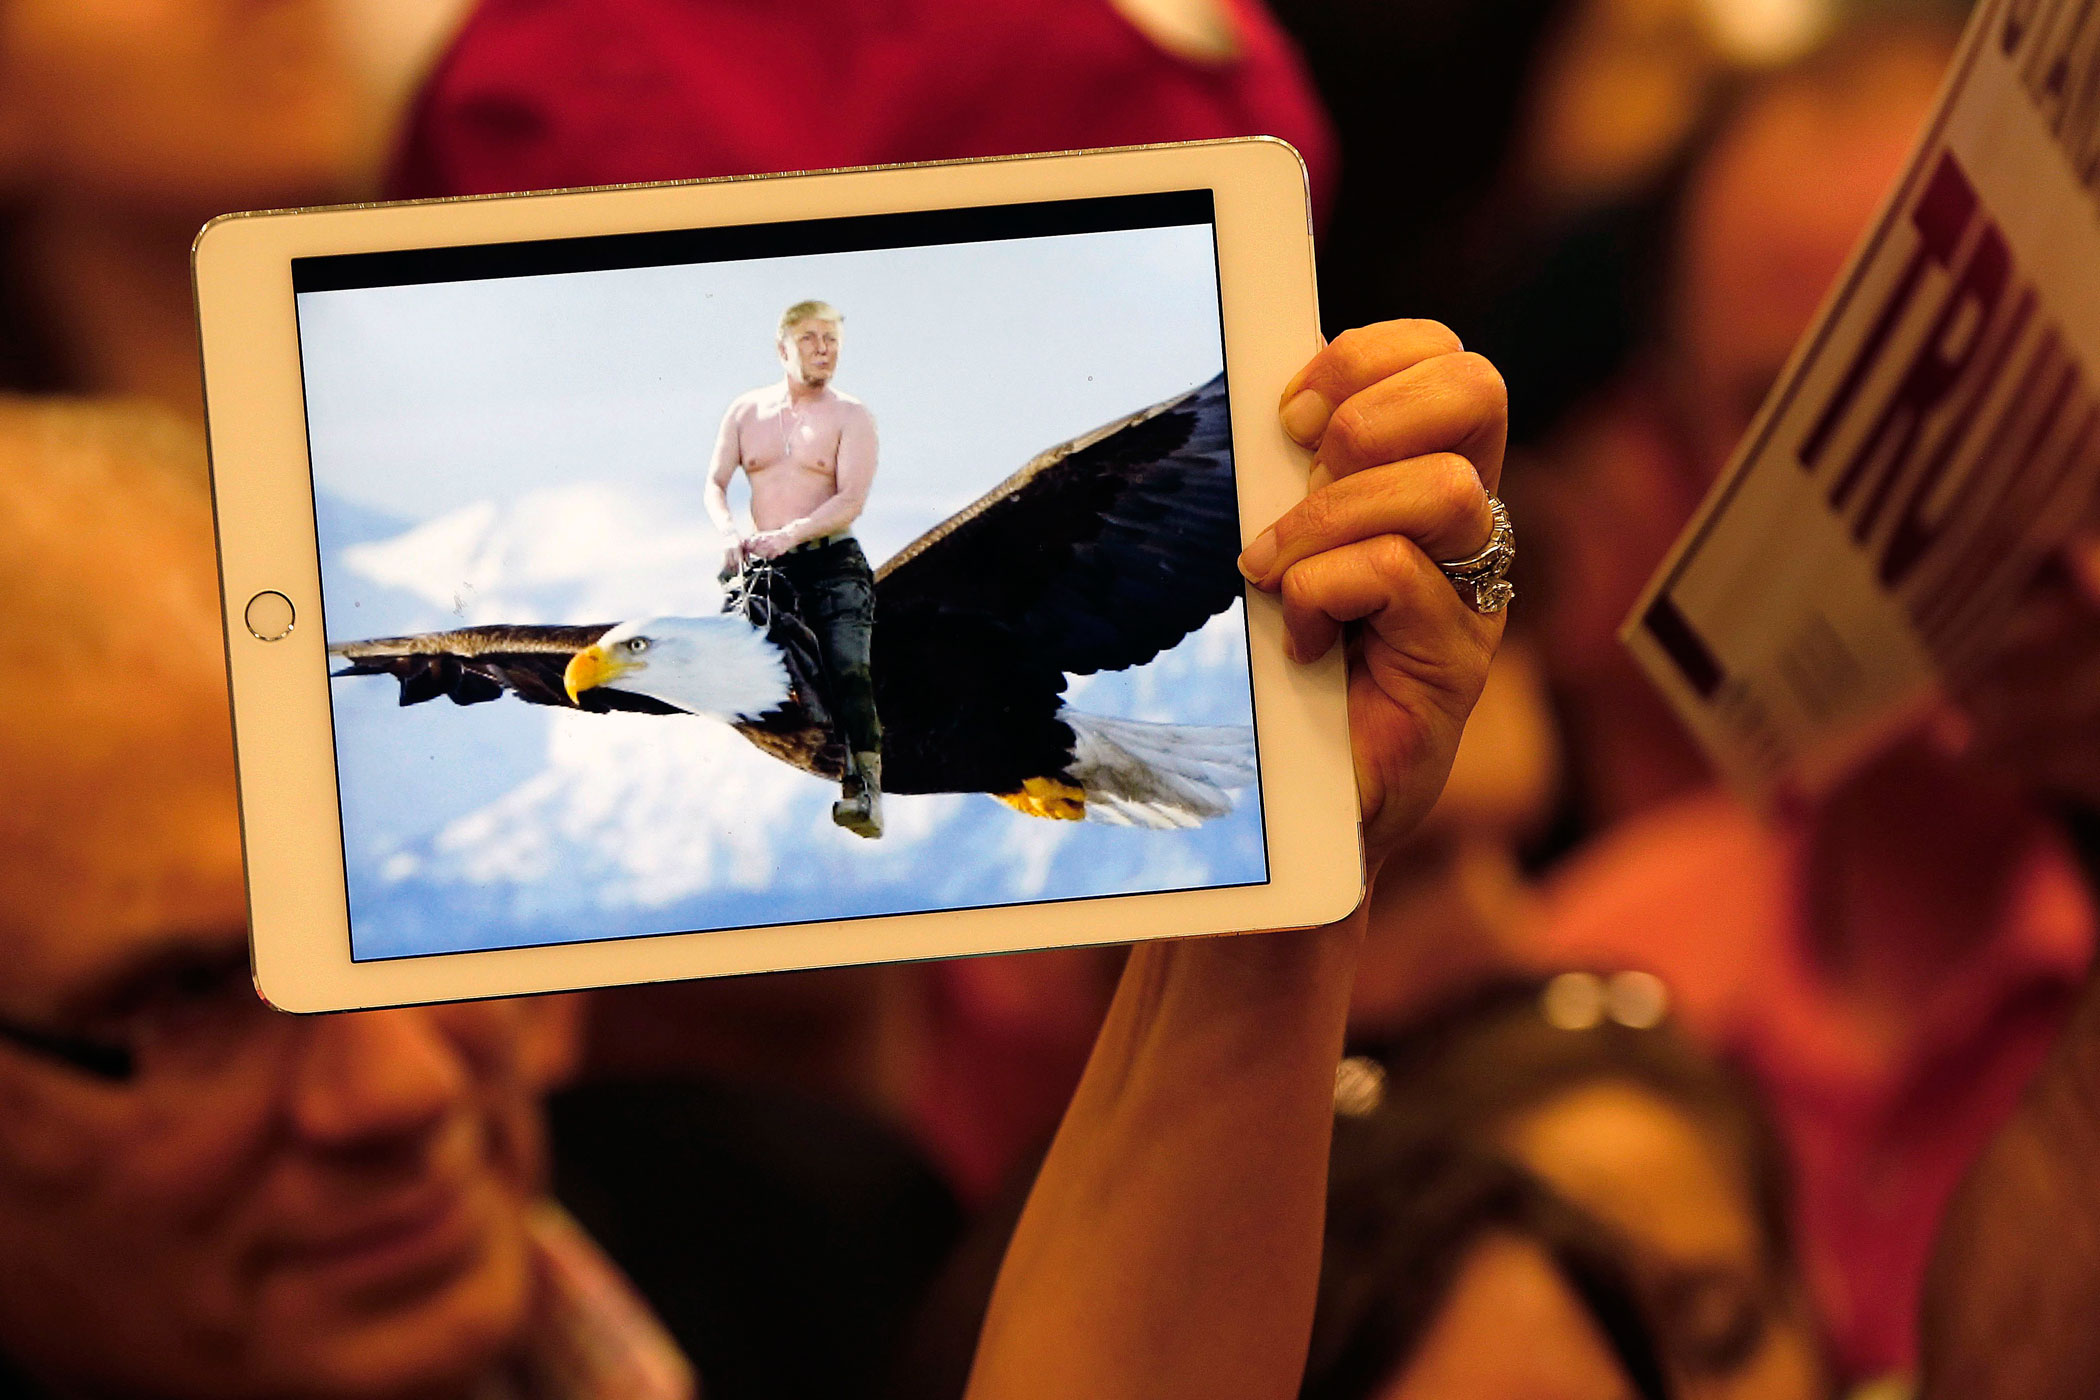 A supporter of Republican presidential candidate Donald Trump holds up an illustration of him riding shirtless on the back of a Bald Eagle, as he greets the crowd after speaking at a campaign rally in New Orleans, on March 4.